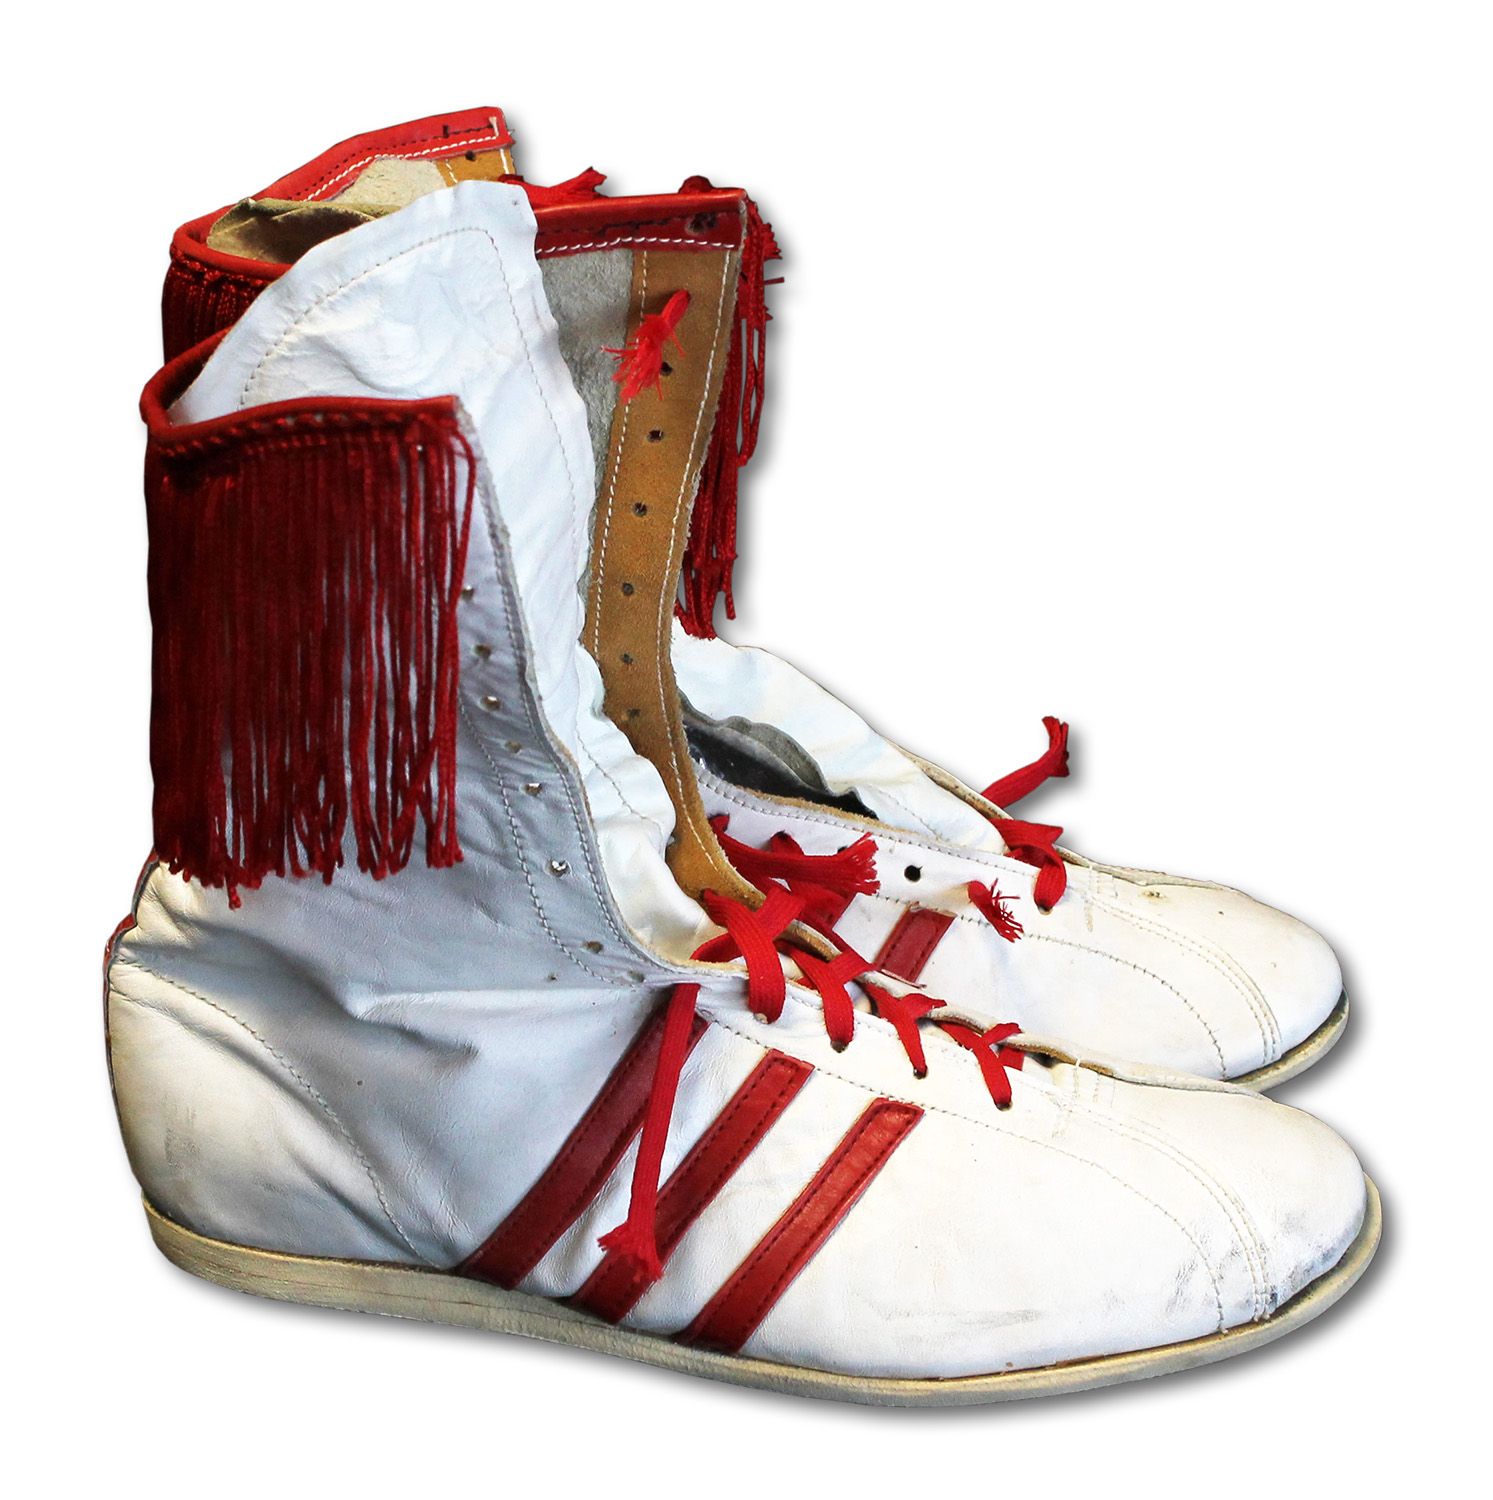 sugar rays boxing boots